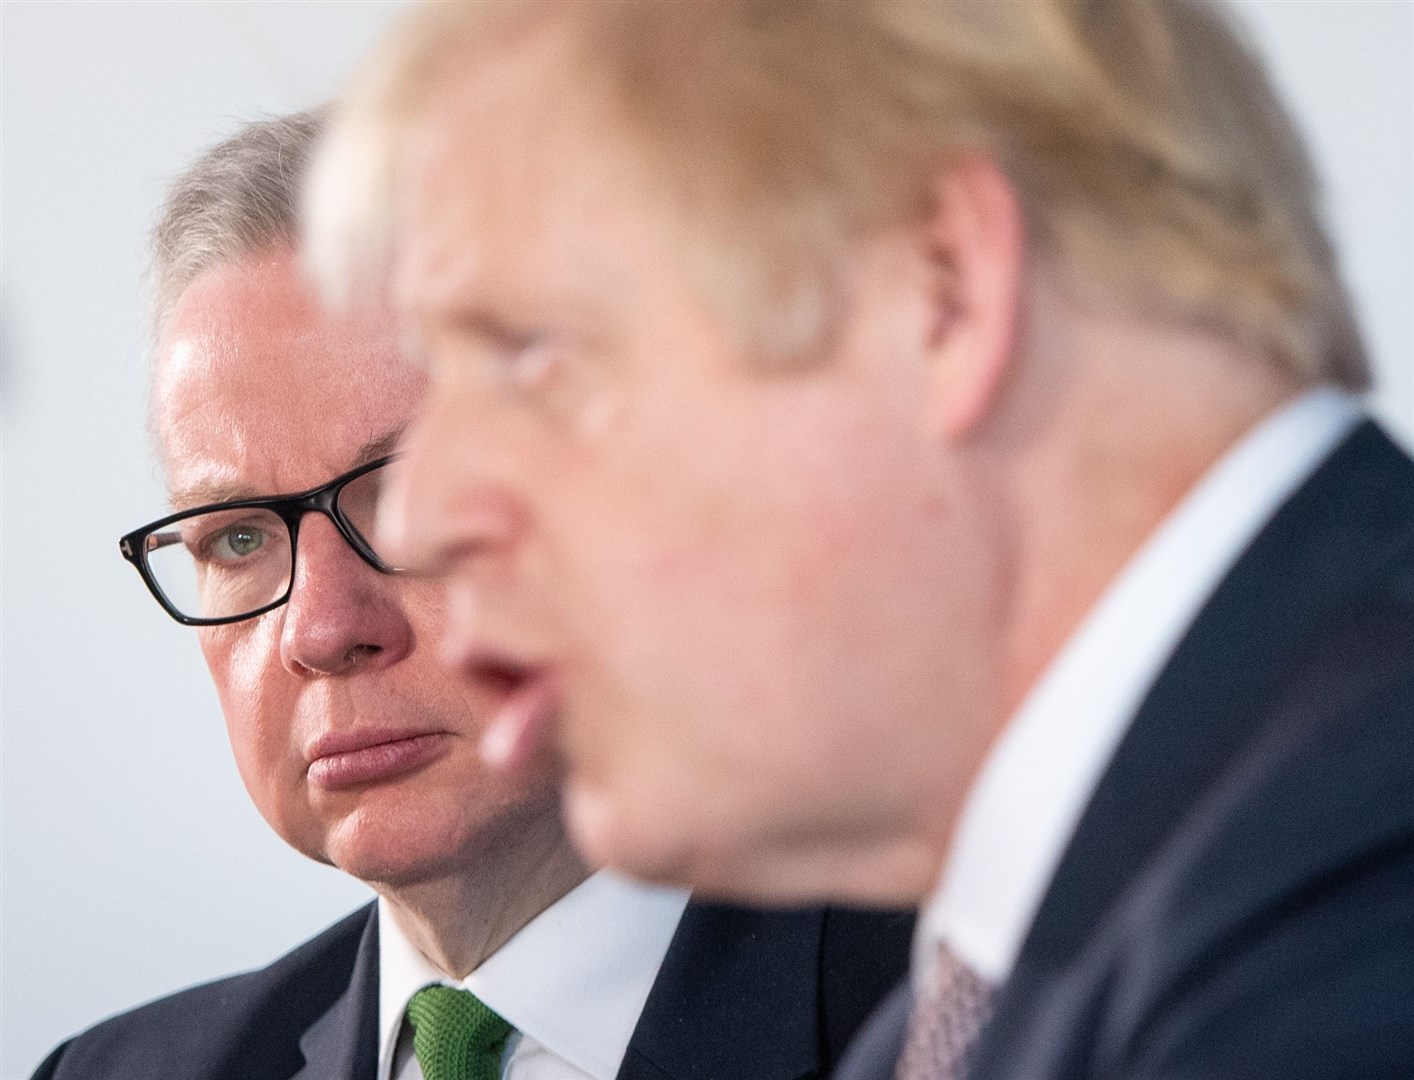 Michael Gove defended former prime minister Boris Johnson’s government against claims it was steeped in chaos (Dominic Lipinski/PA)